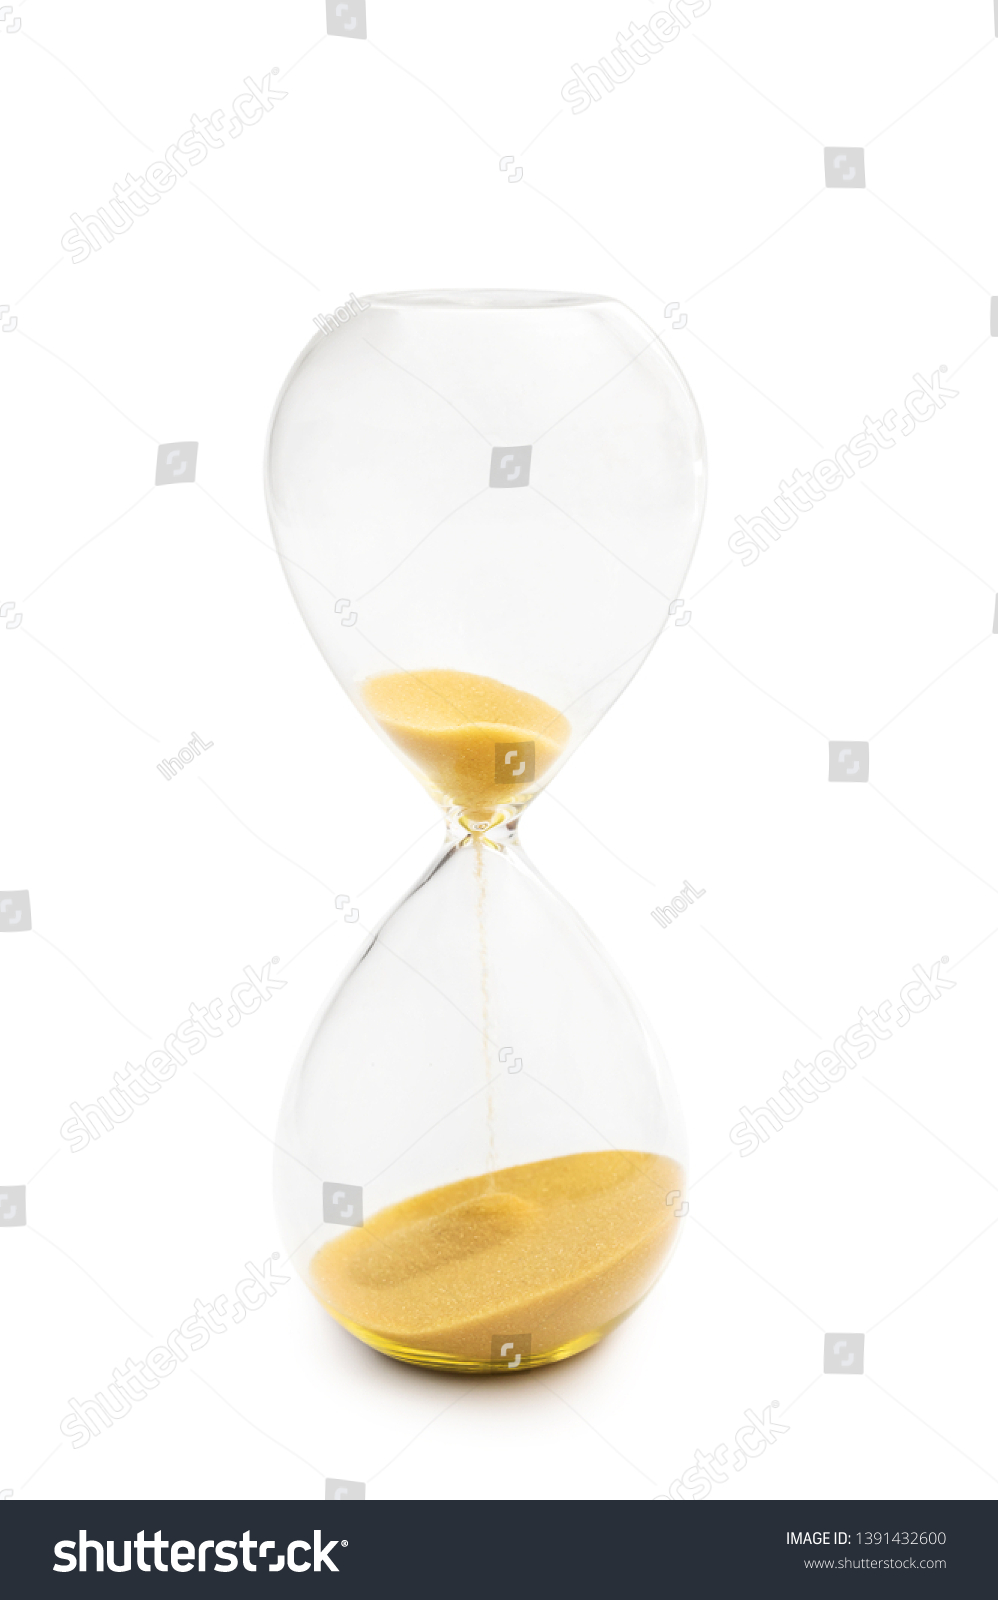 Hourglass Isolated On White Background Stock Photo 1391432600